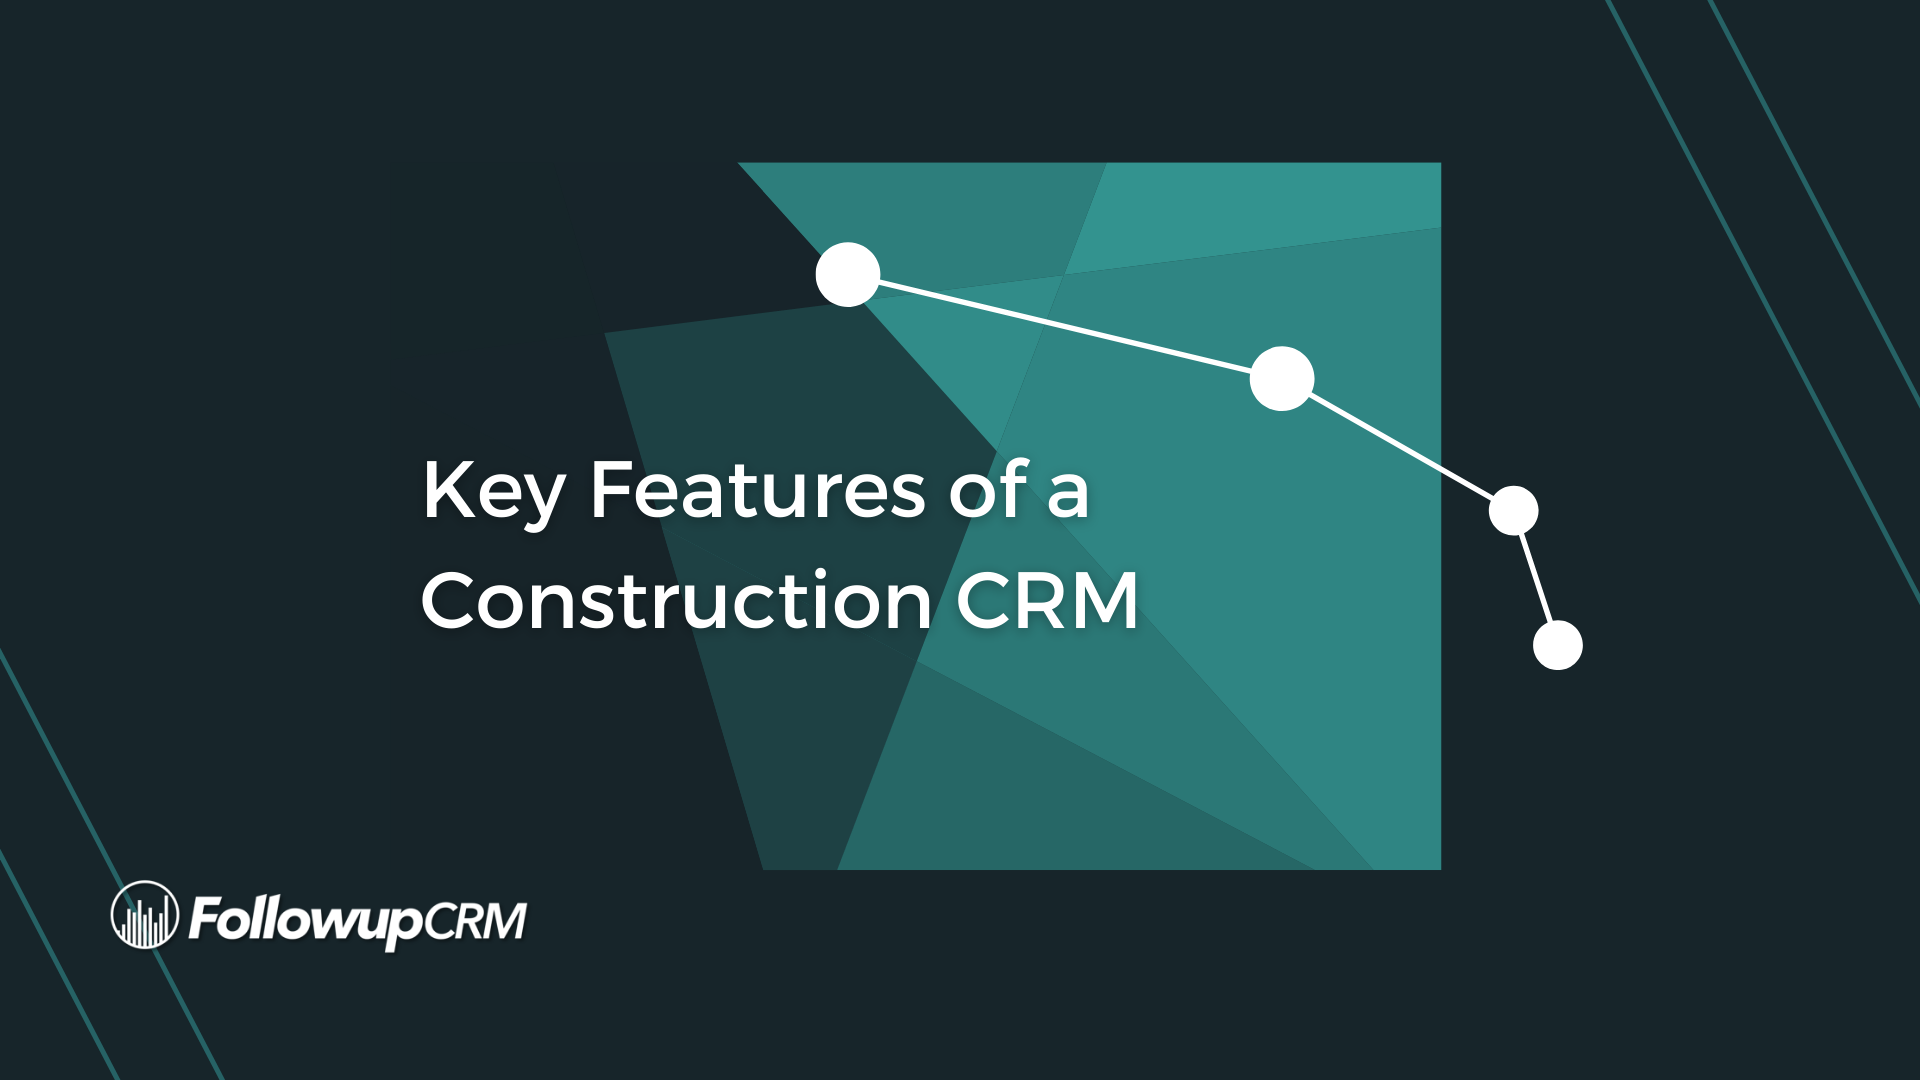 Key Features of a Construction CRM